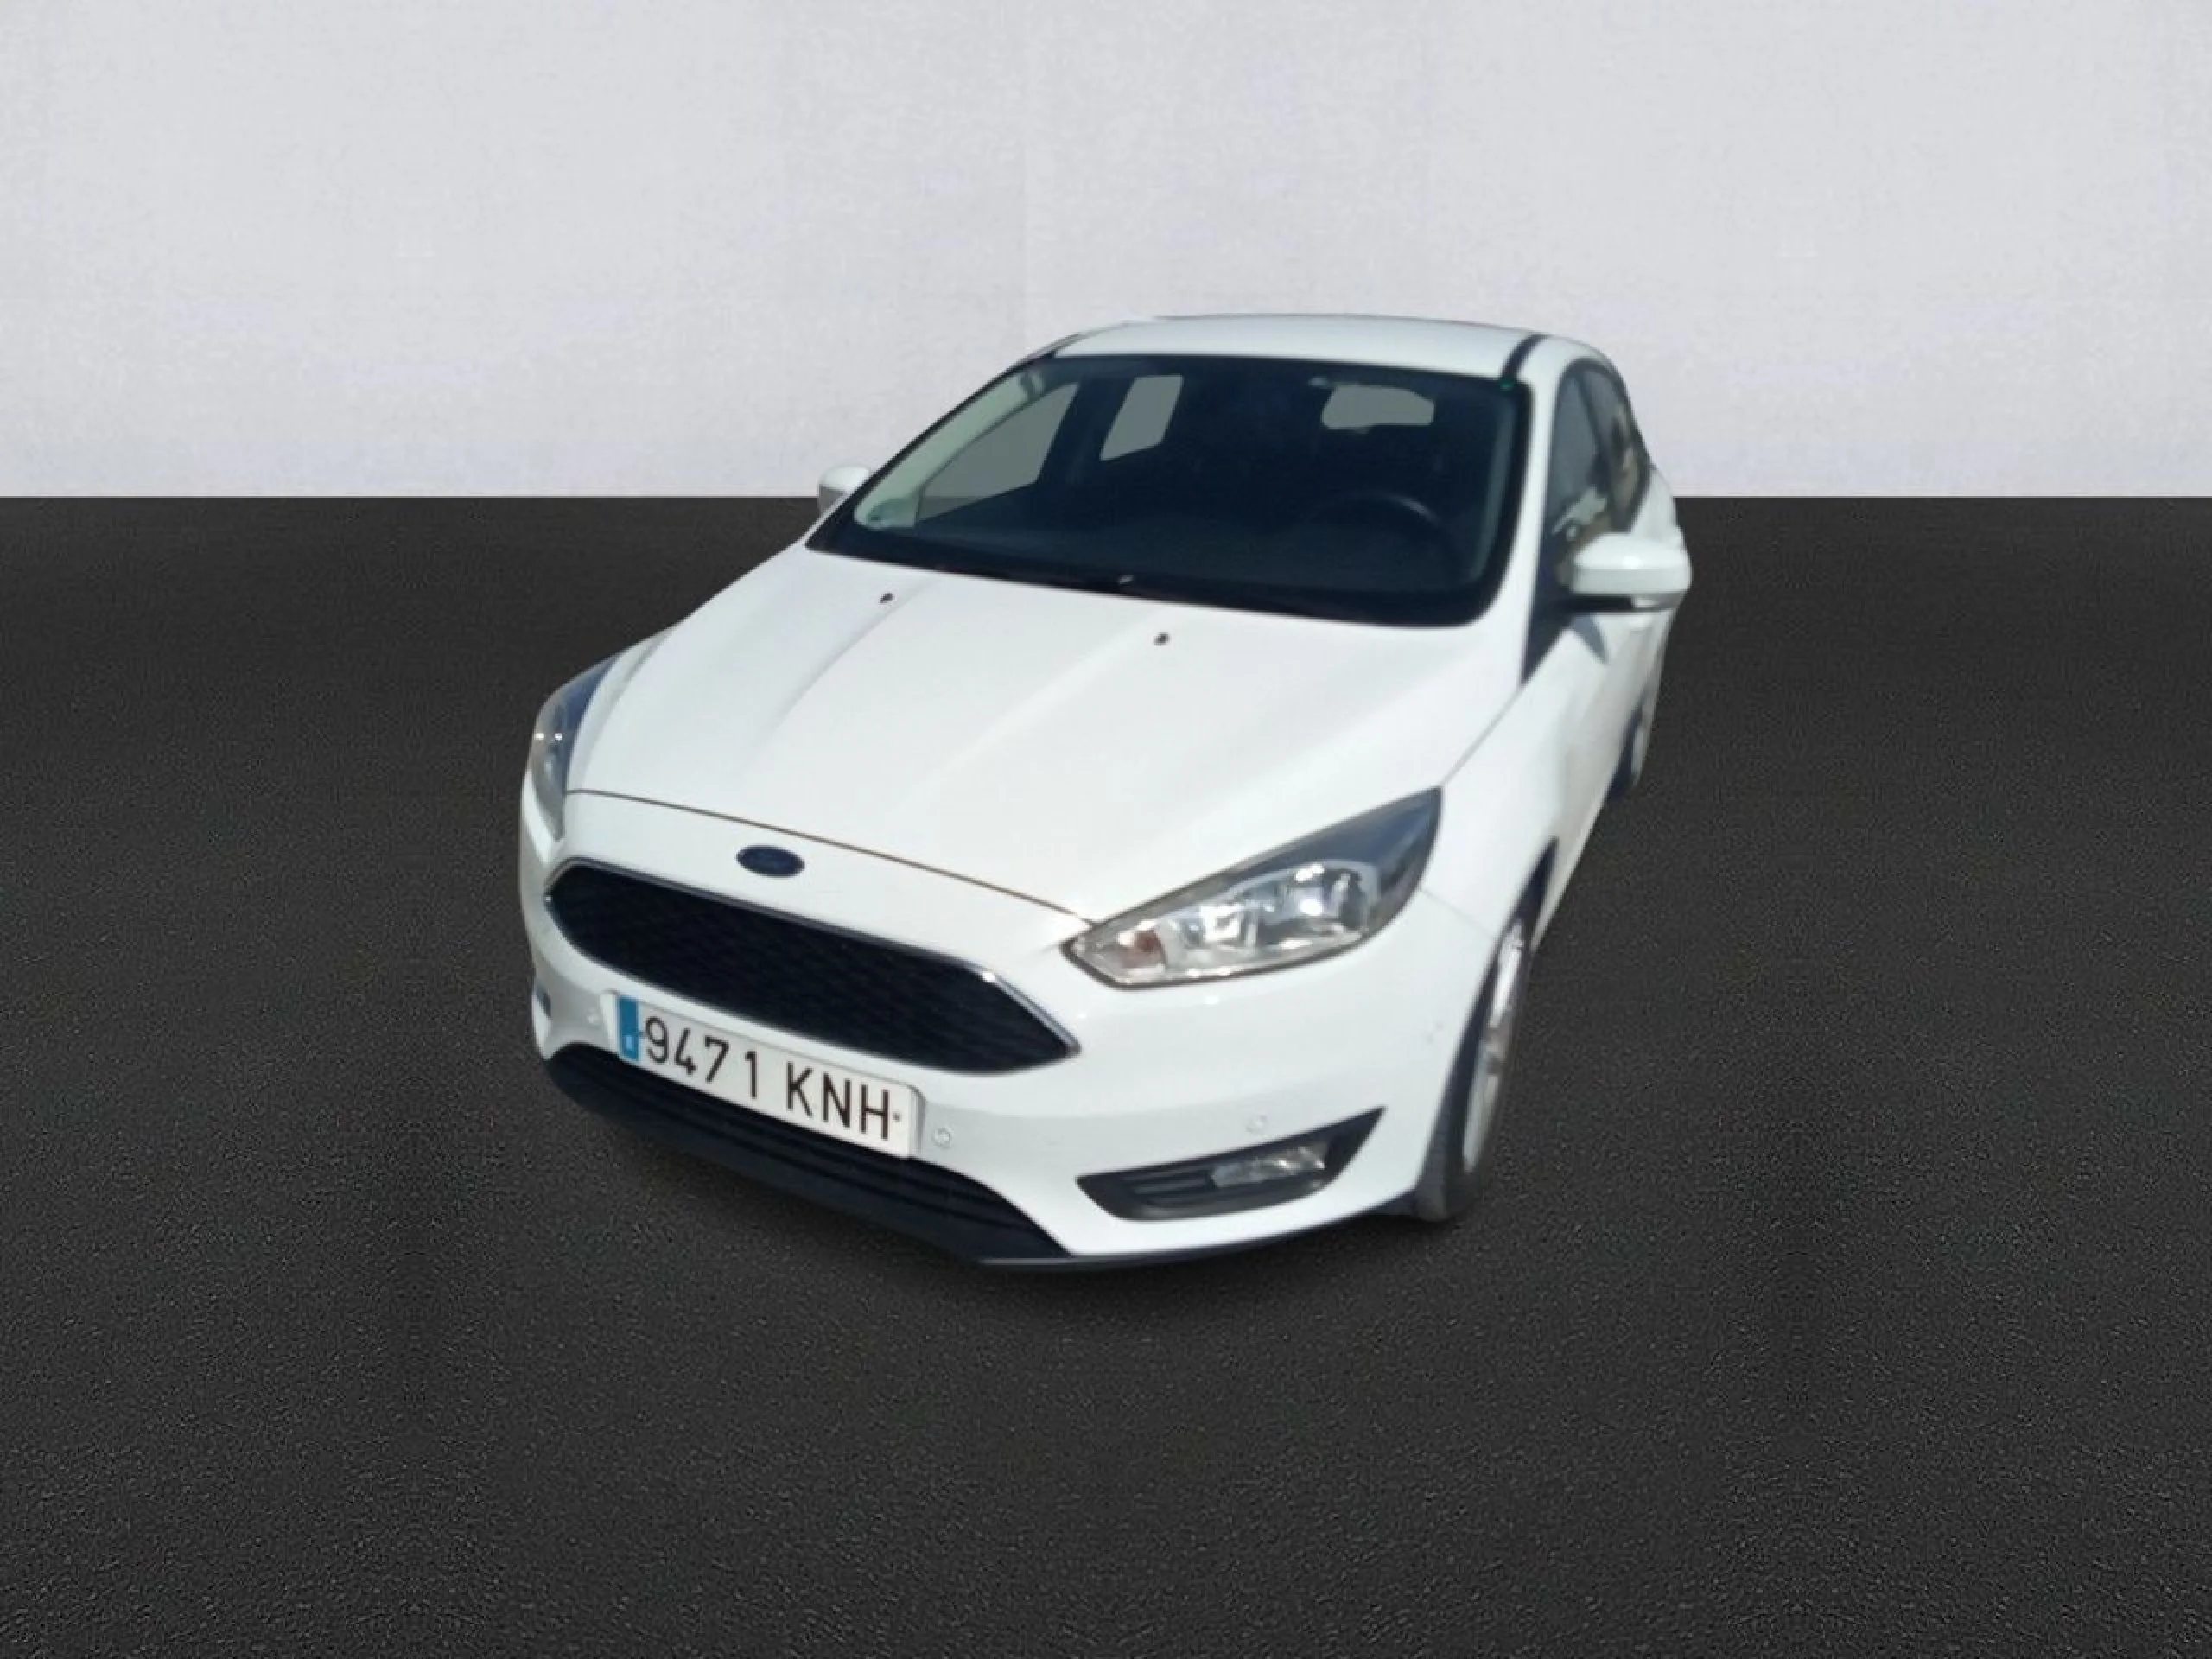 Ford Focus (O) 1.5 TDCi 88kW Trend+ - Foto 1